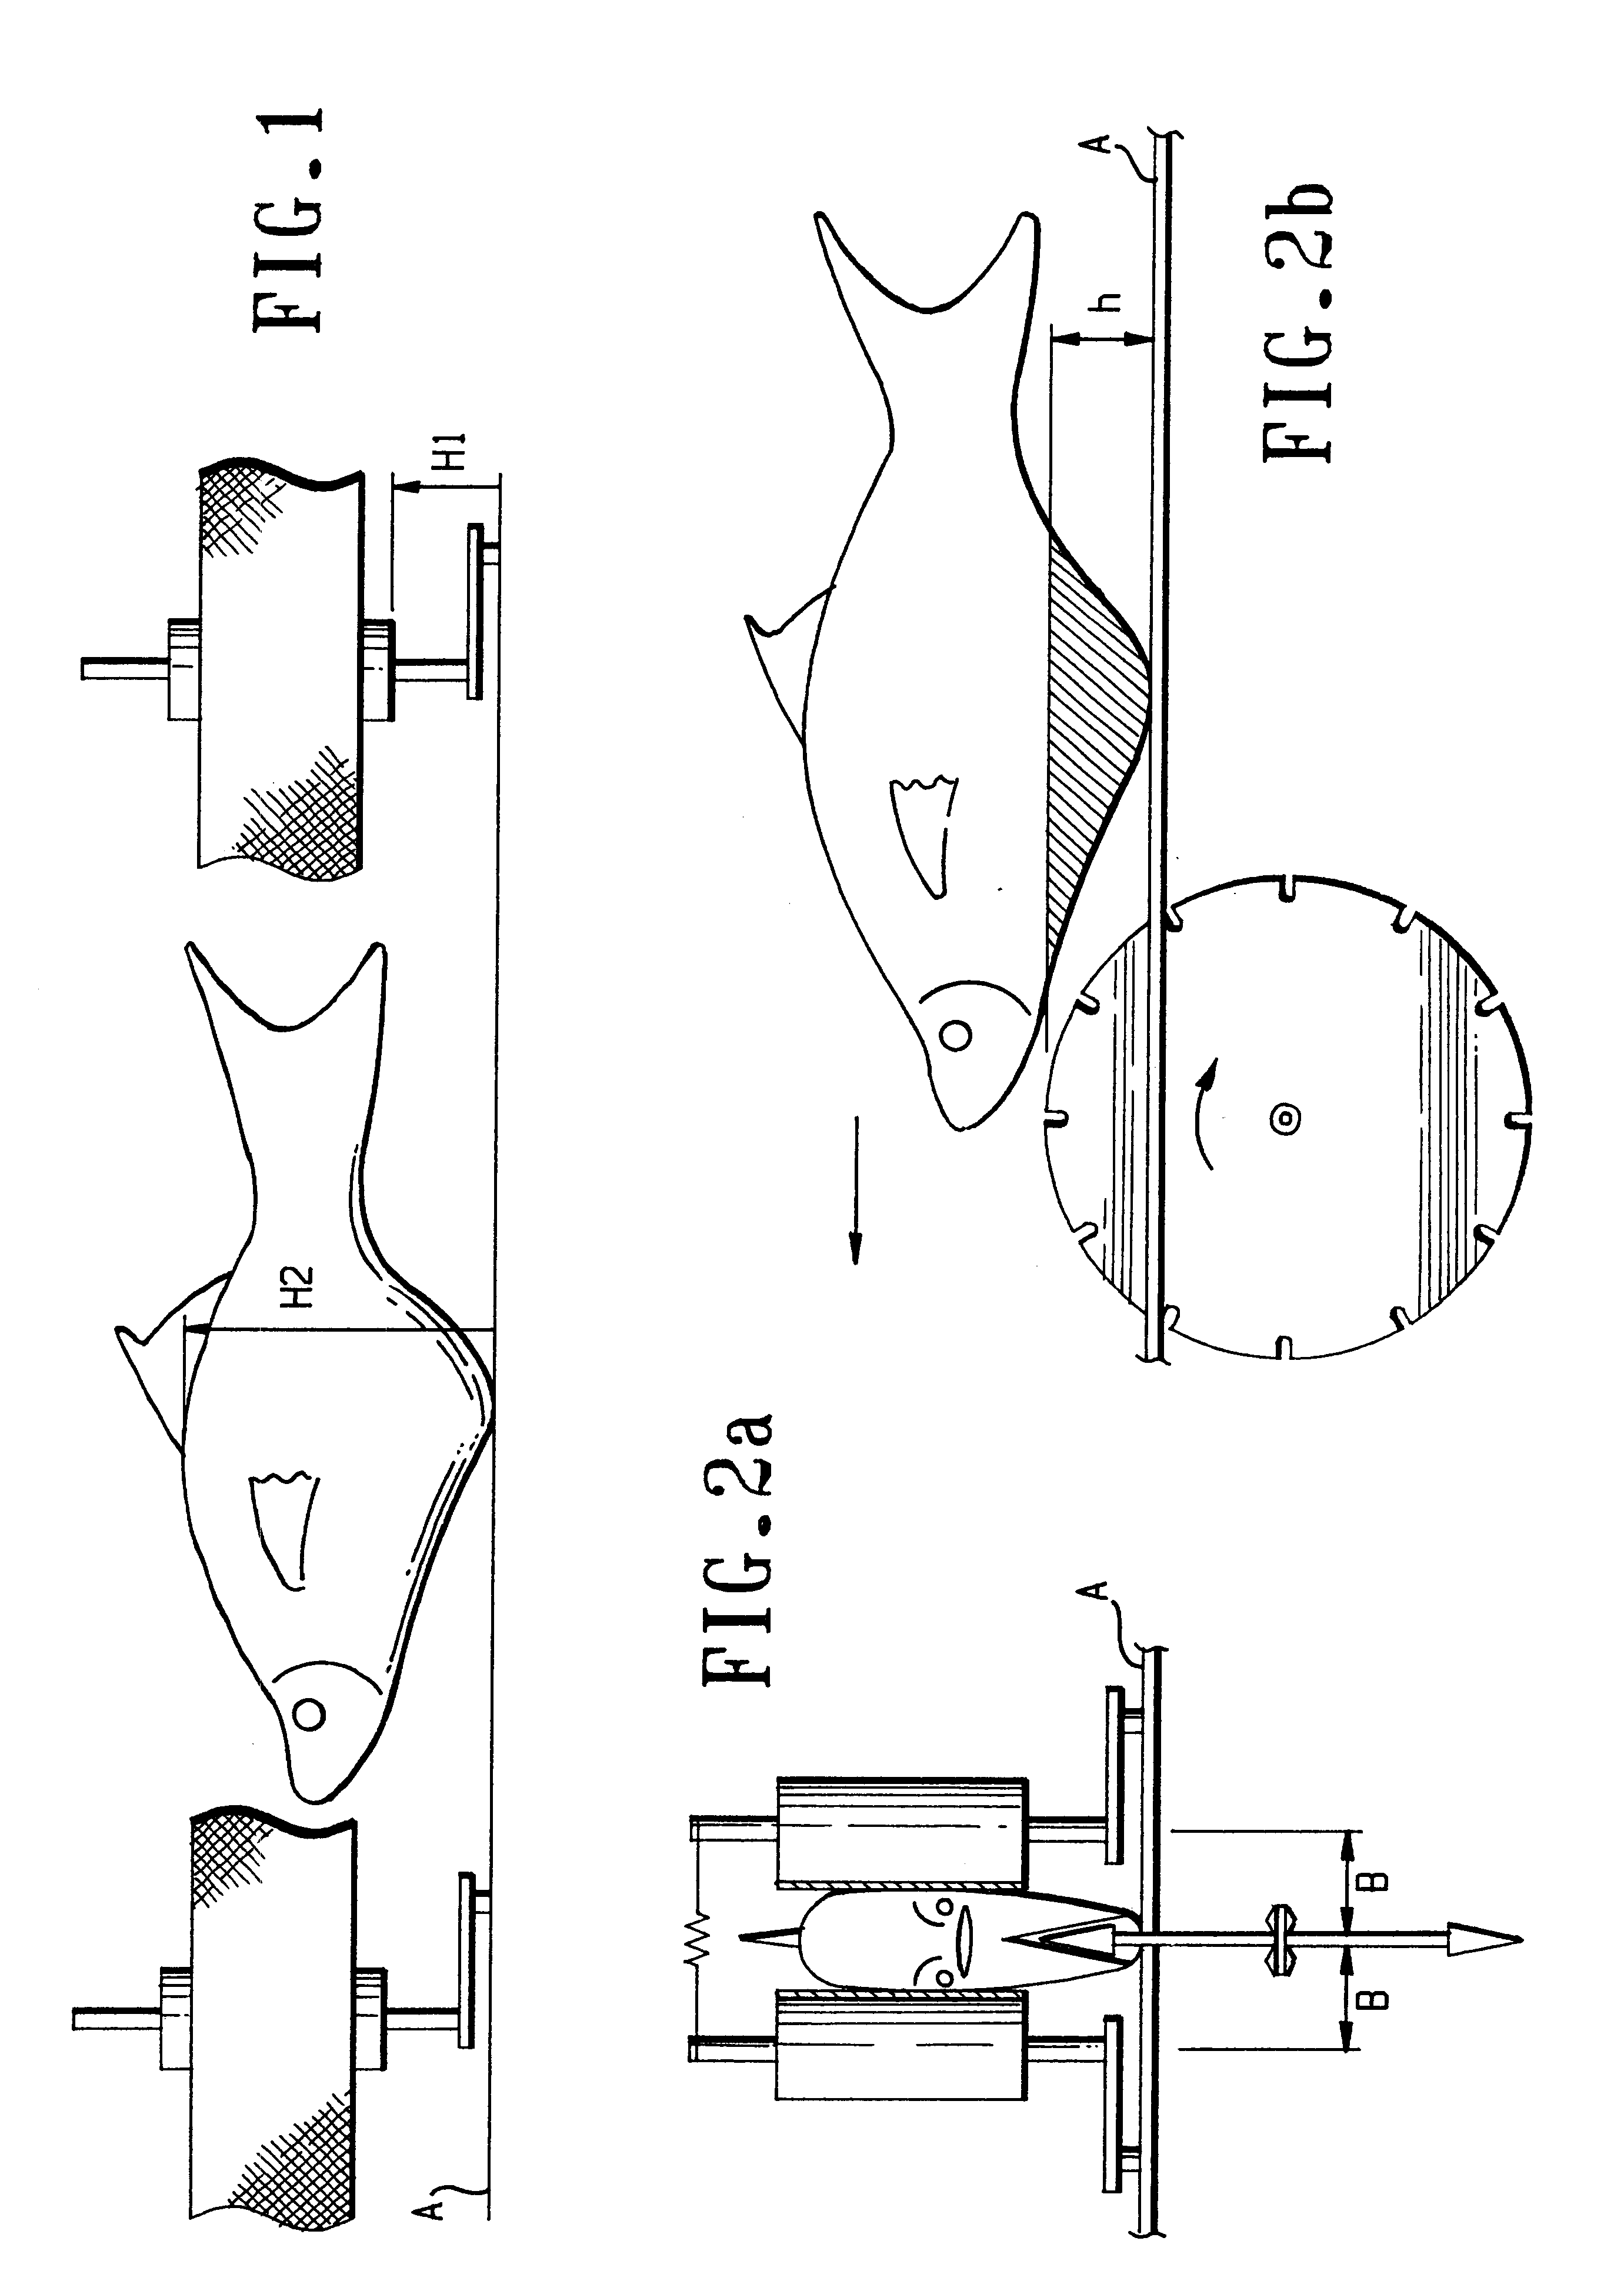 Method for scaling fresh fish and removing its internal organs and device for implementation of the offered method